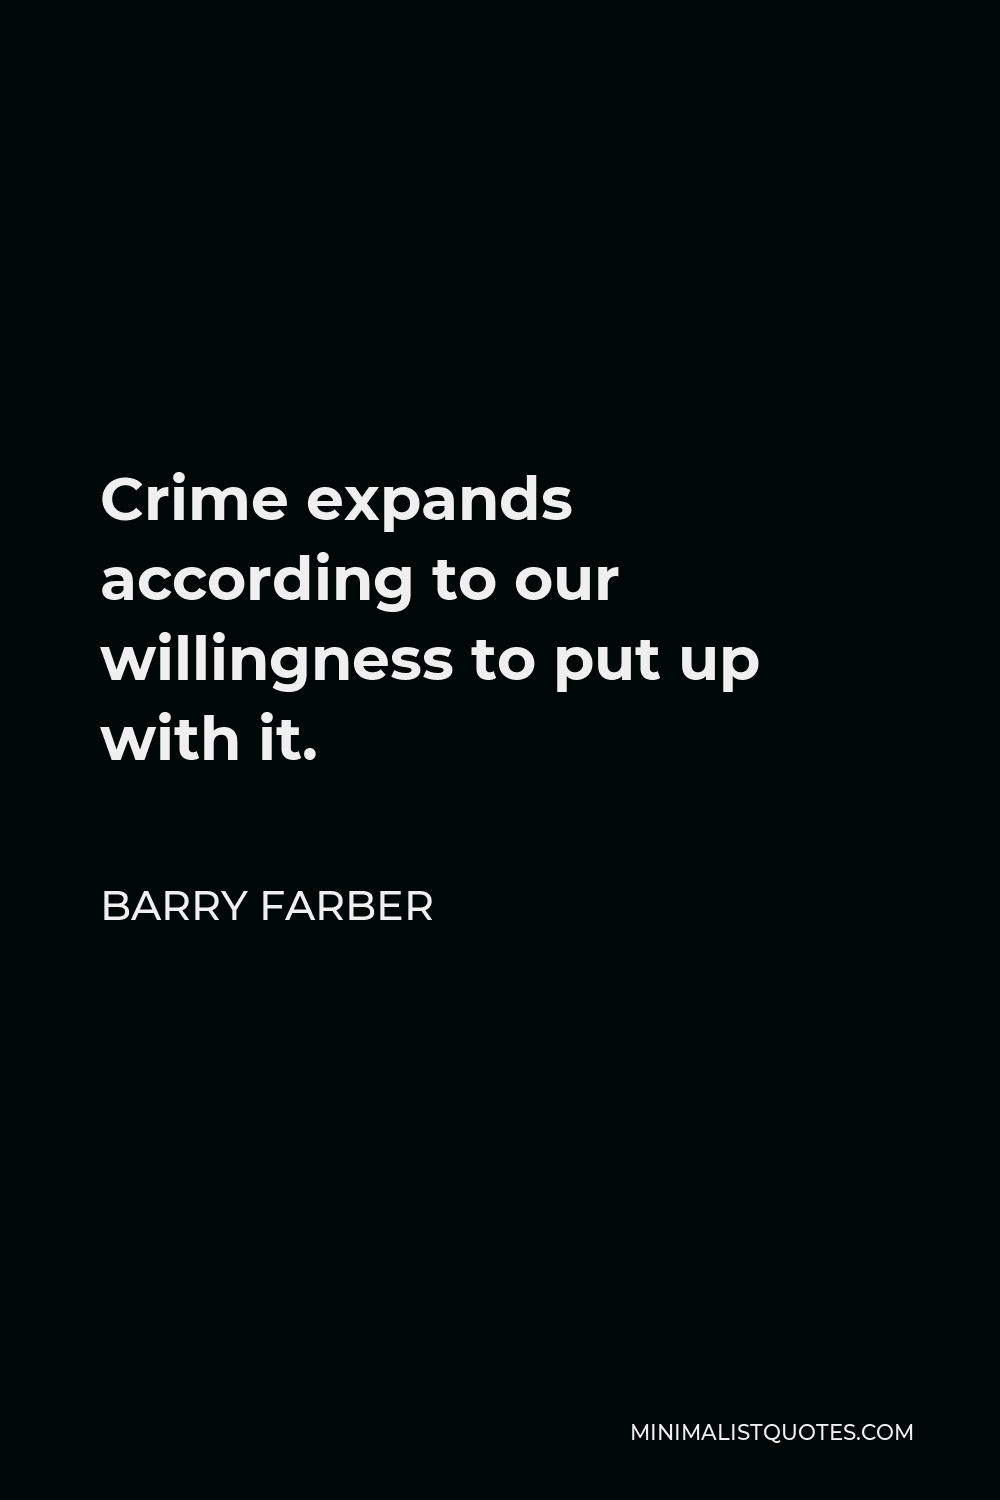 Barry Farber Quote - Crime expands according to our willingness to put up with it.